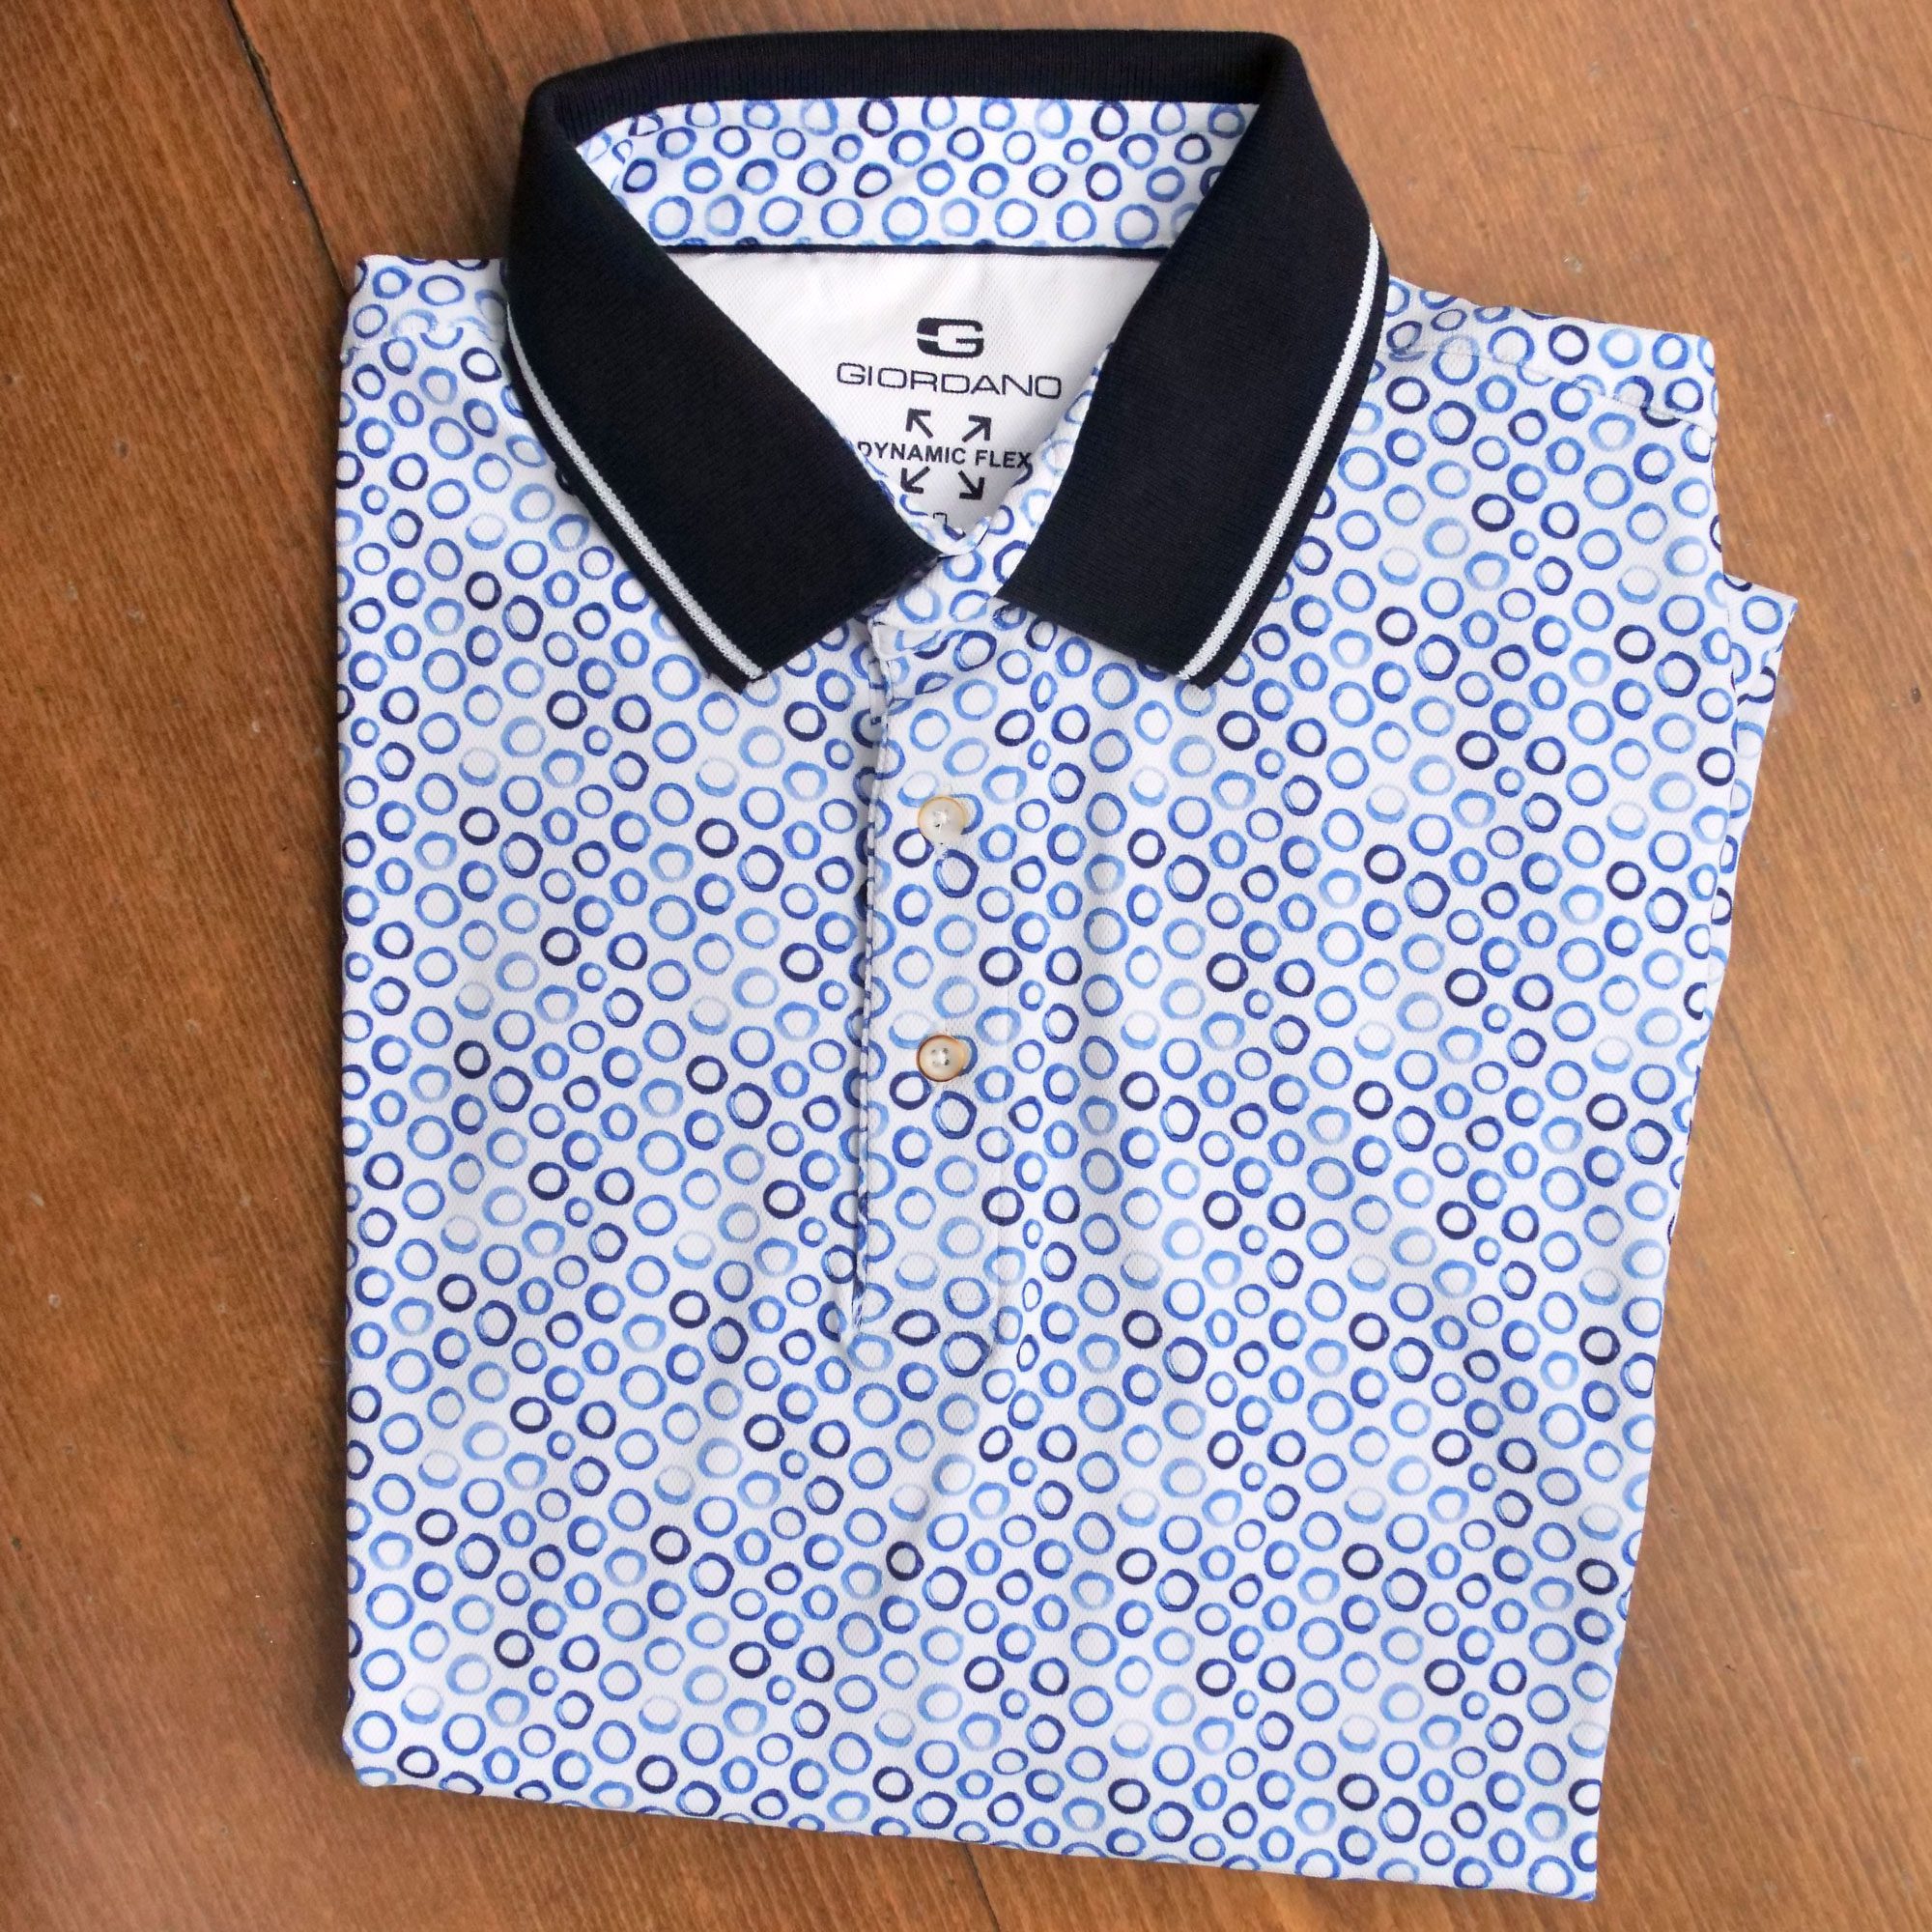 Giordano short sleeved polo shirt with blue circles on white with a ...